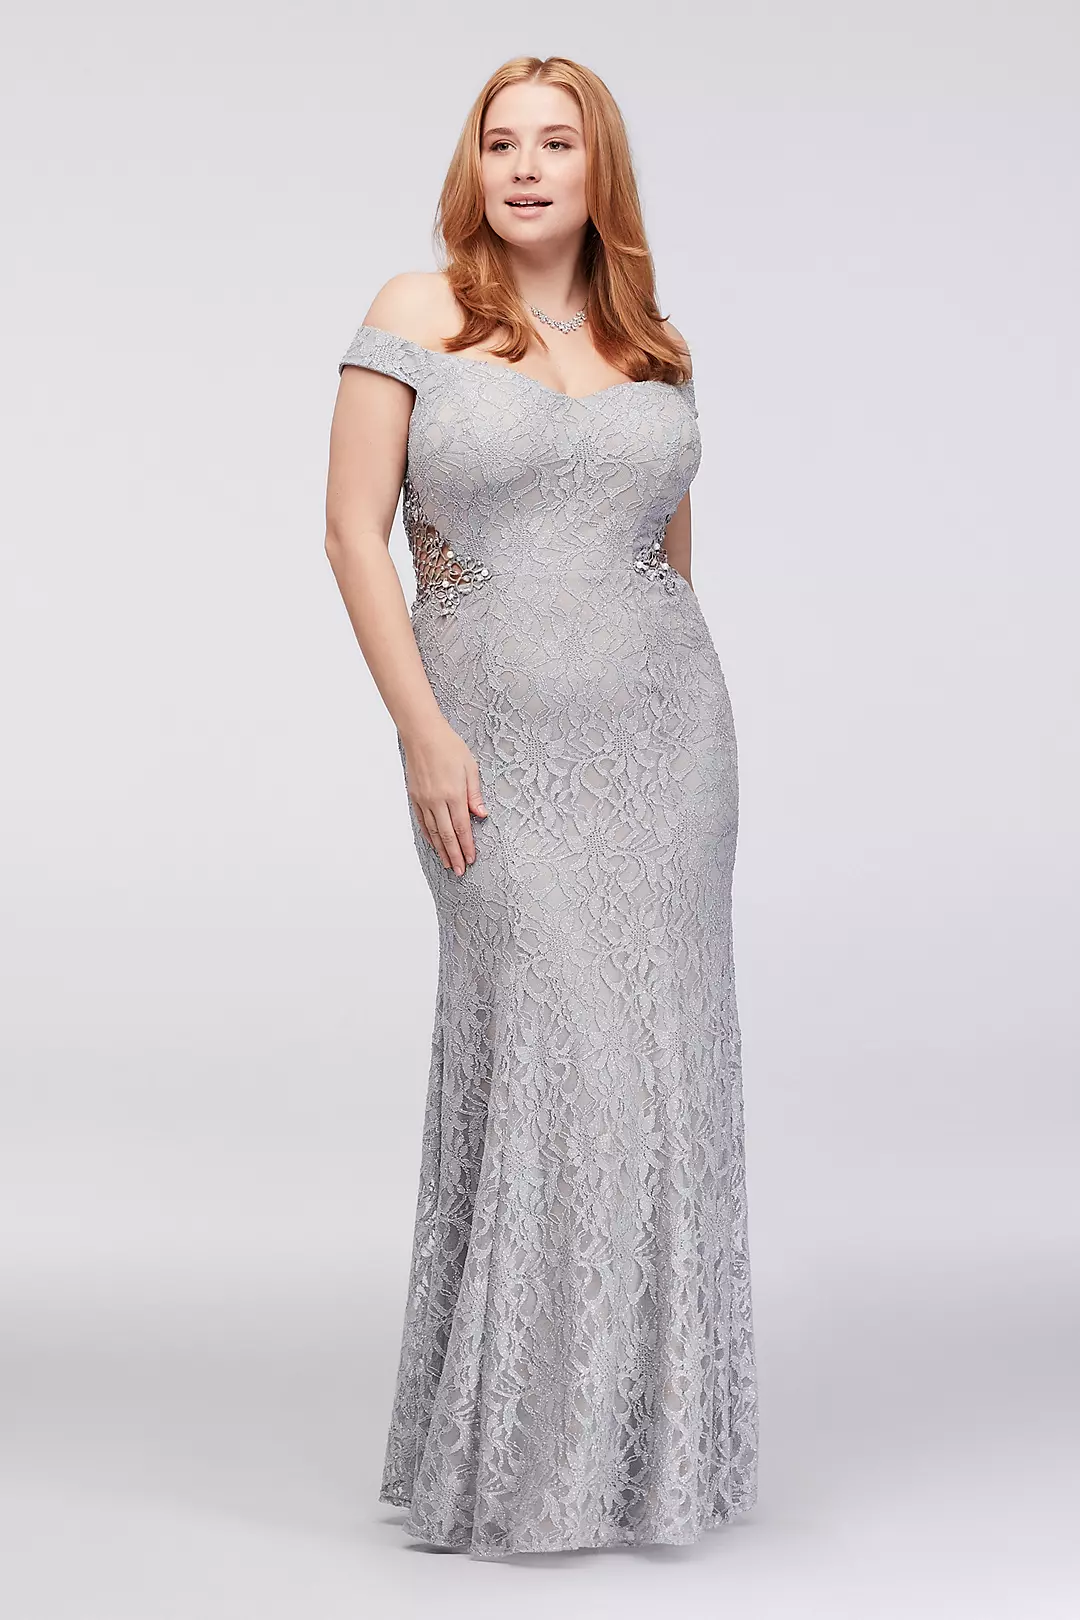 Lace Off-The-Shoulder Gown with Beaded Sides Image